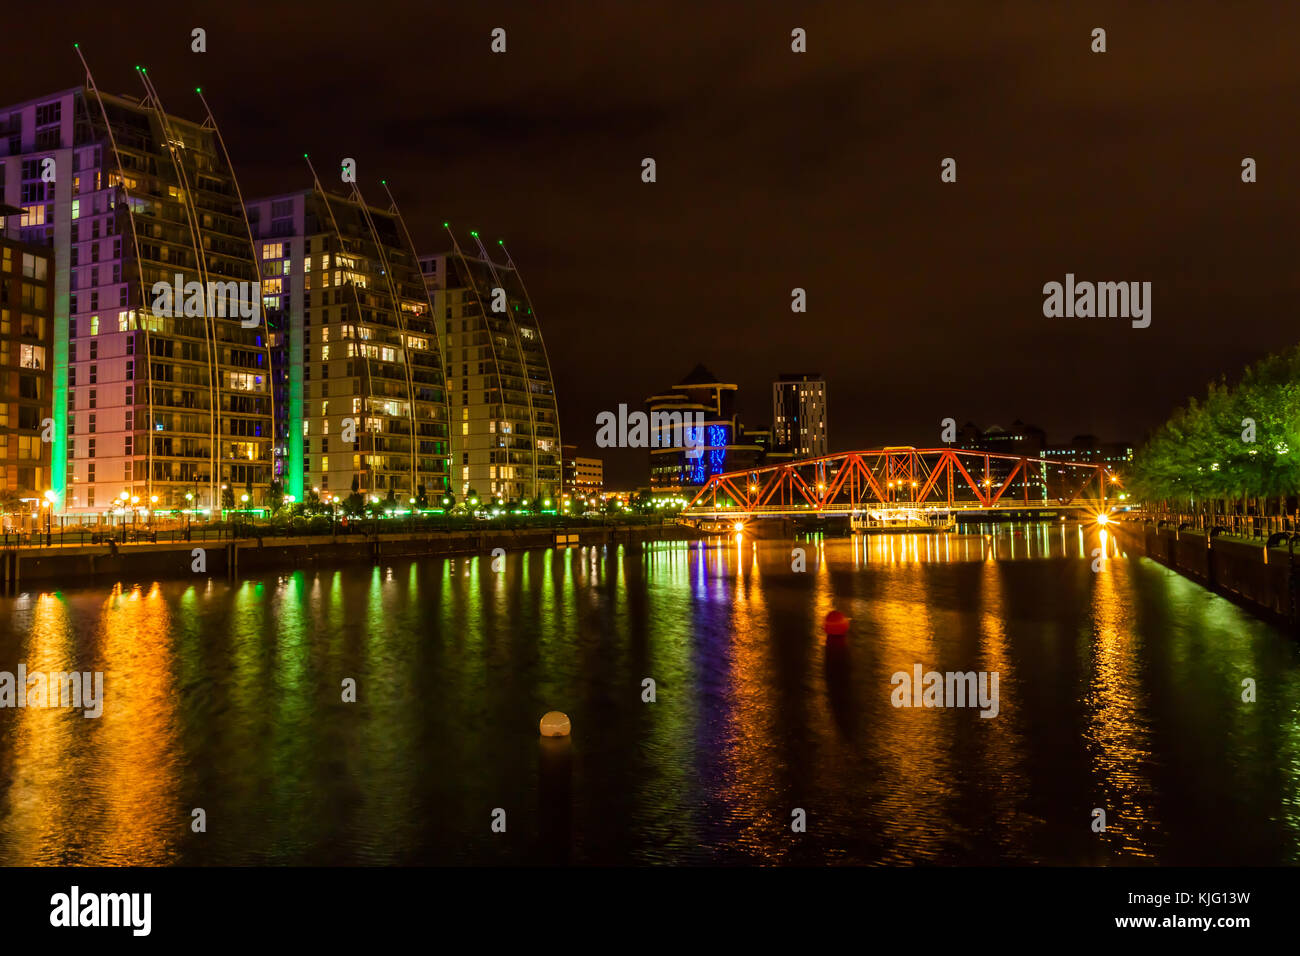 The Huron Basin at Salford Quays with the NV apartment buildings and swing bridge lit against the night sky. Stock Photo